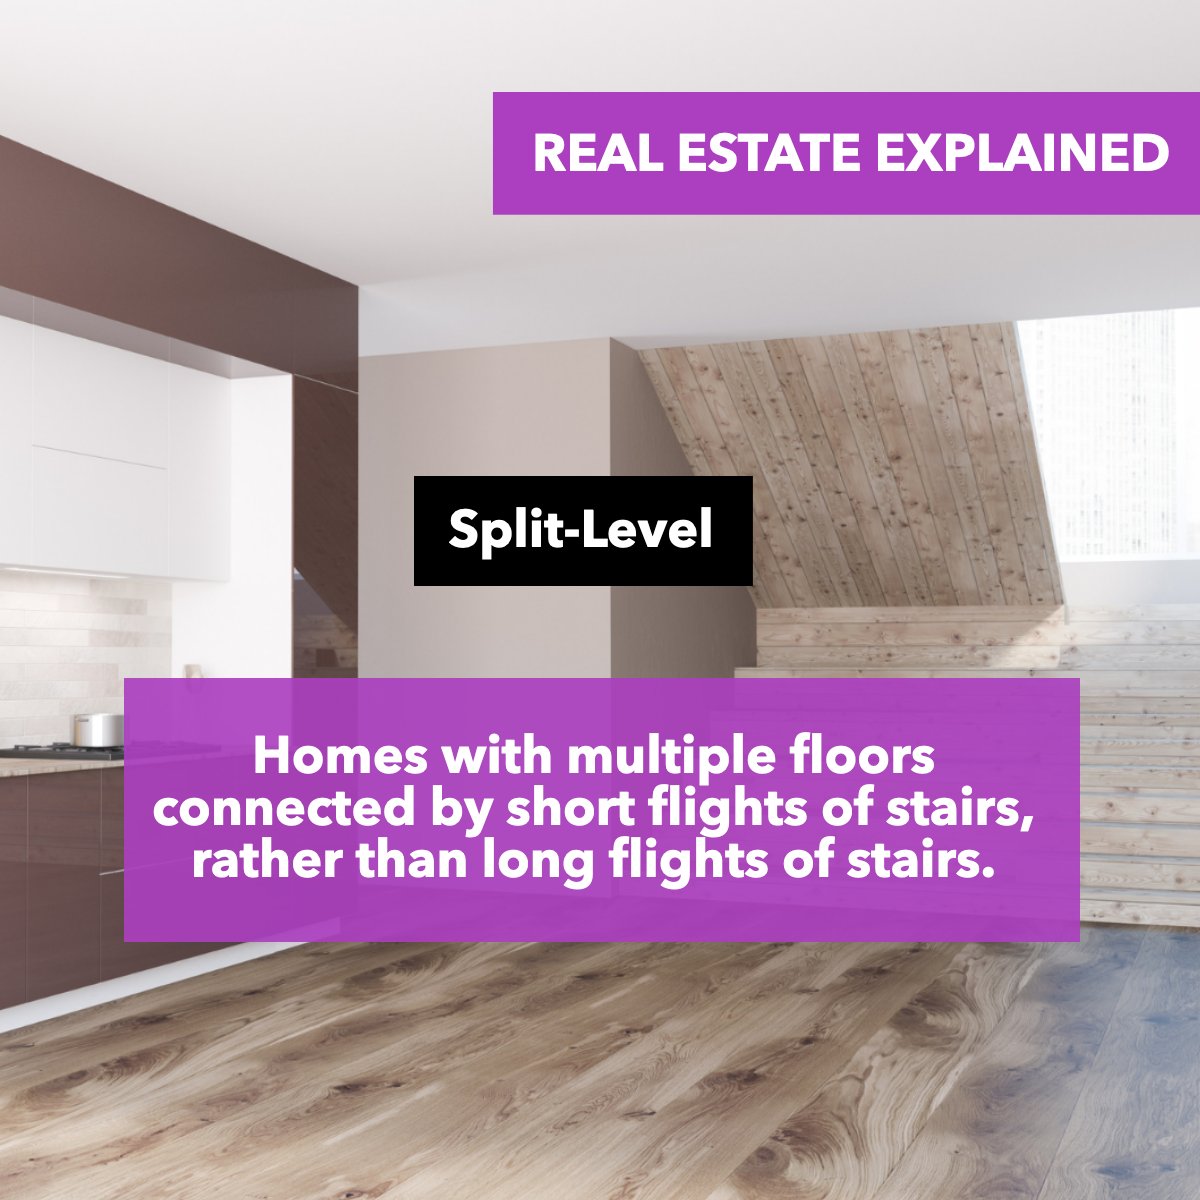 Did you know what a Spit-Level is? 🤔

Is this the type of house that you like?

#splitlevelremodel #splitlevelhome #splitleveldesign